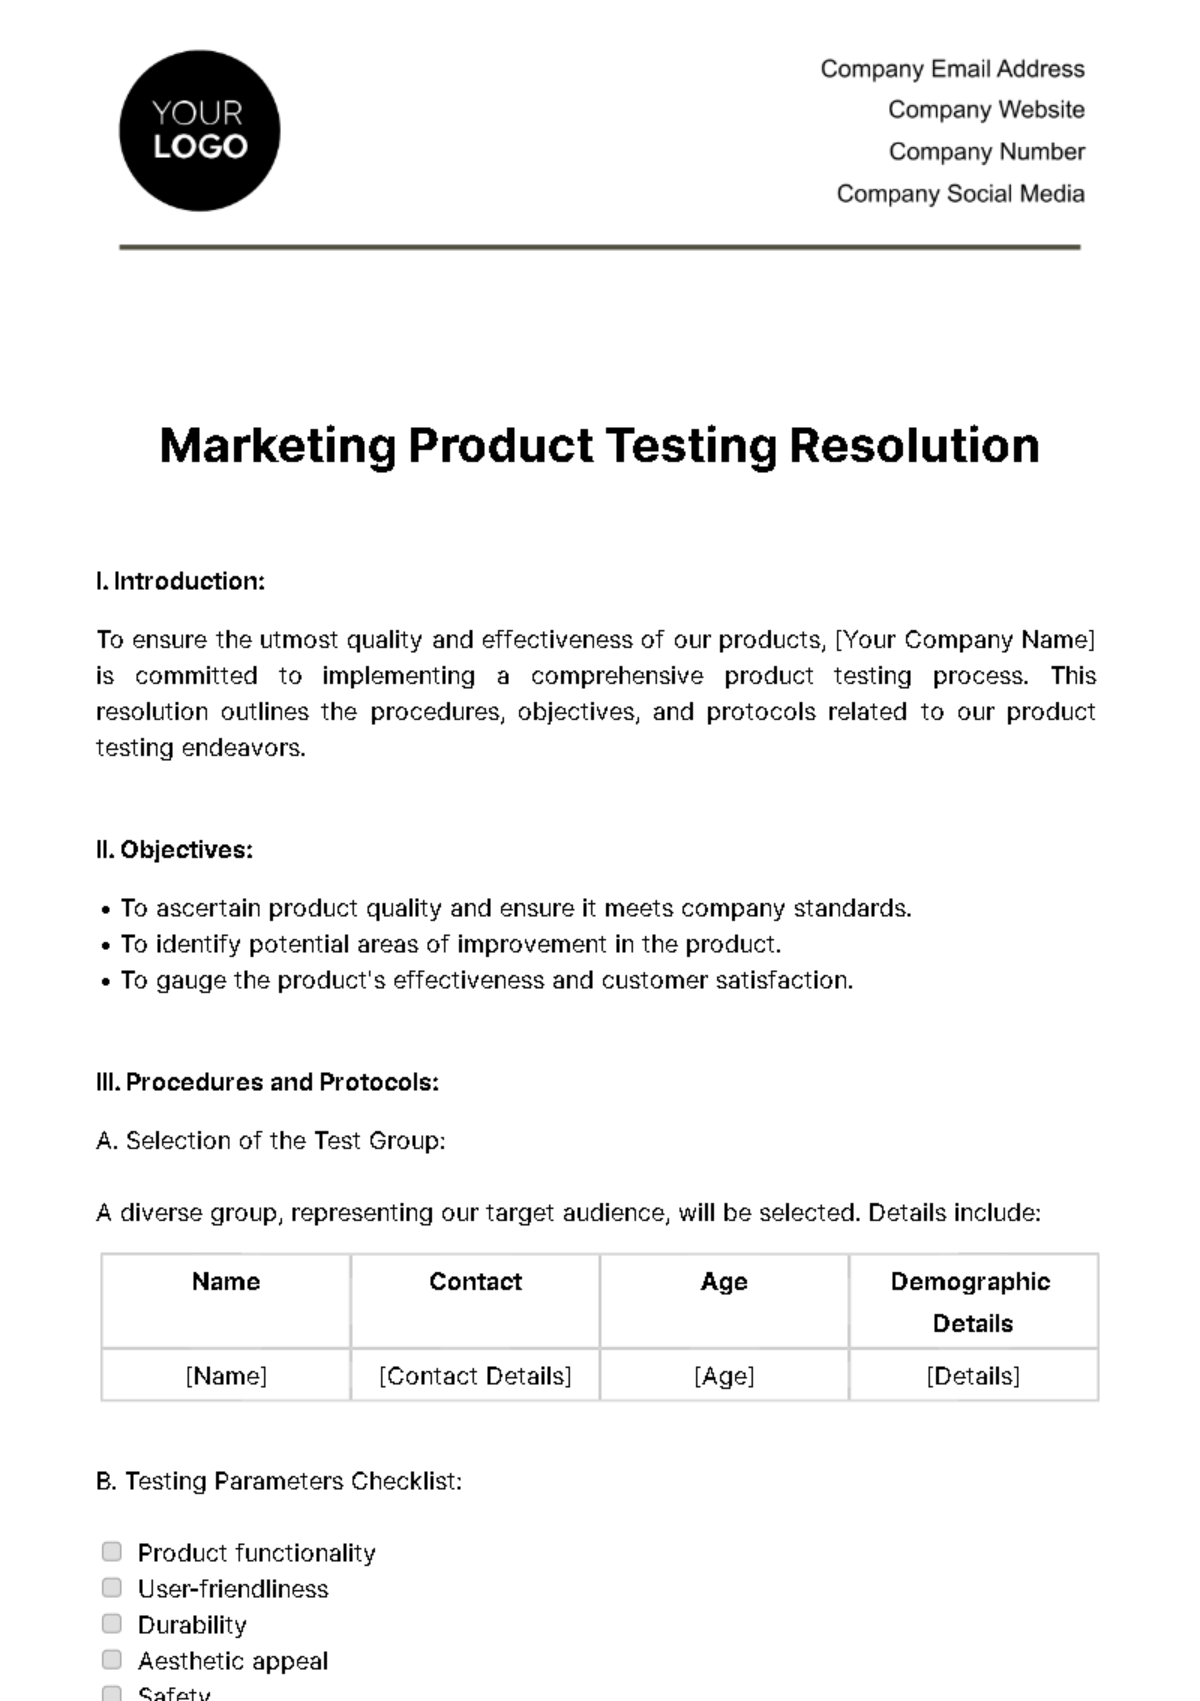 Marketing Product Testing Resolution Template